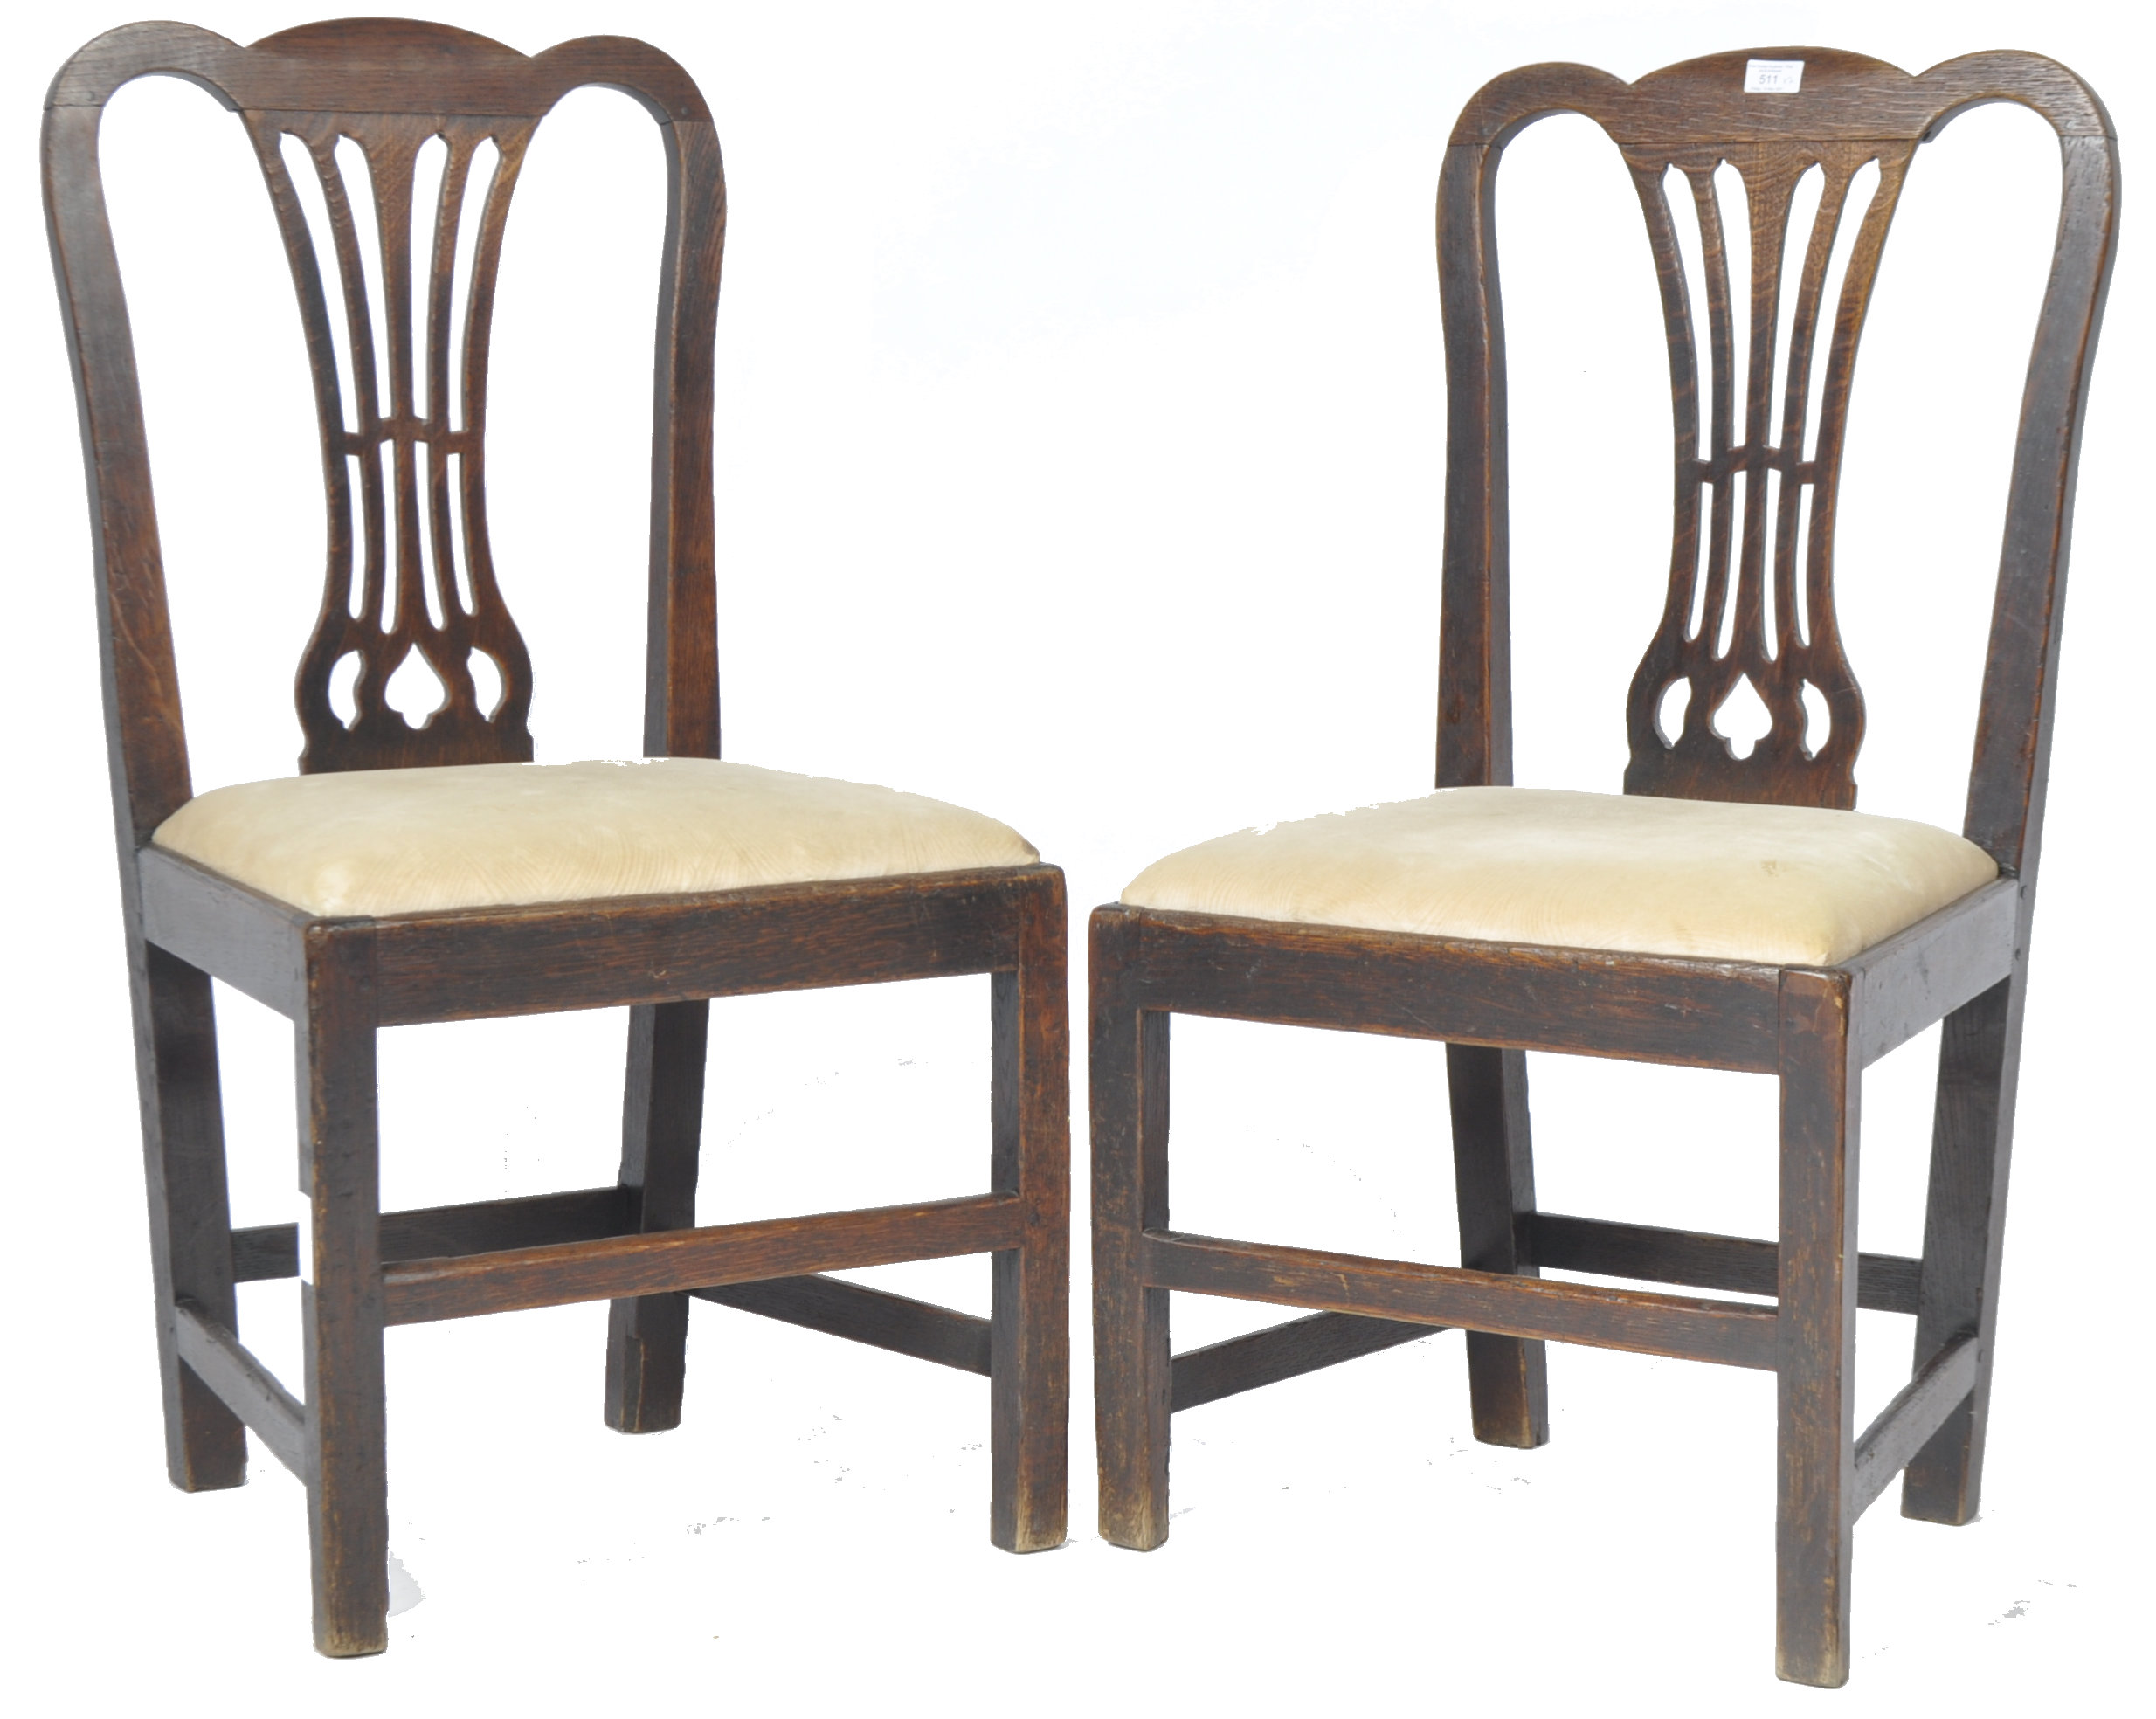 PAIR OF 18TH CENTURY CHIPPENDALE INFLUENCE ELM & OAK CHAIRS